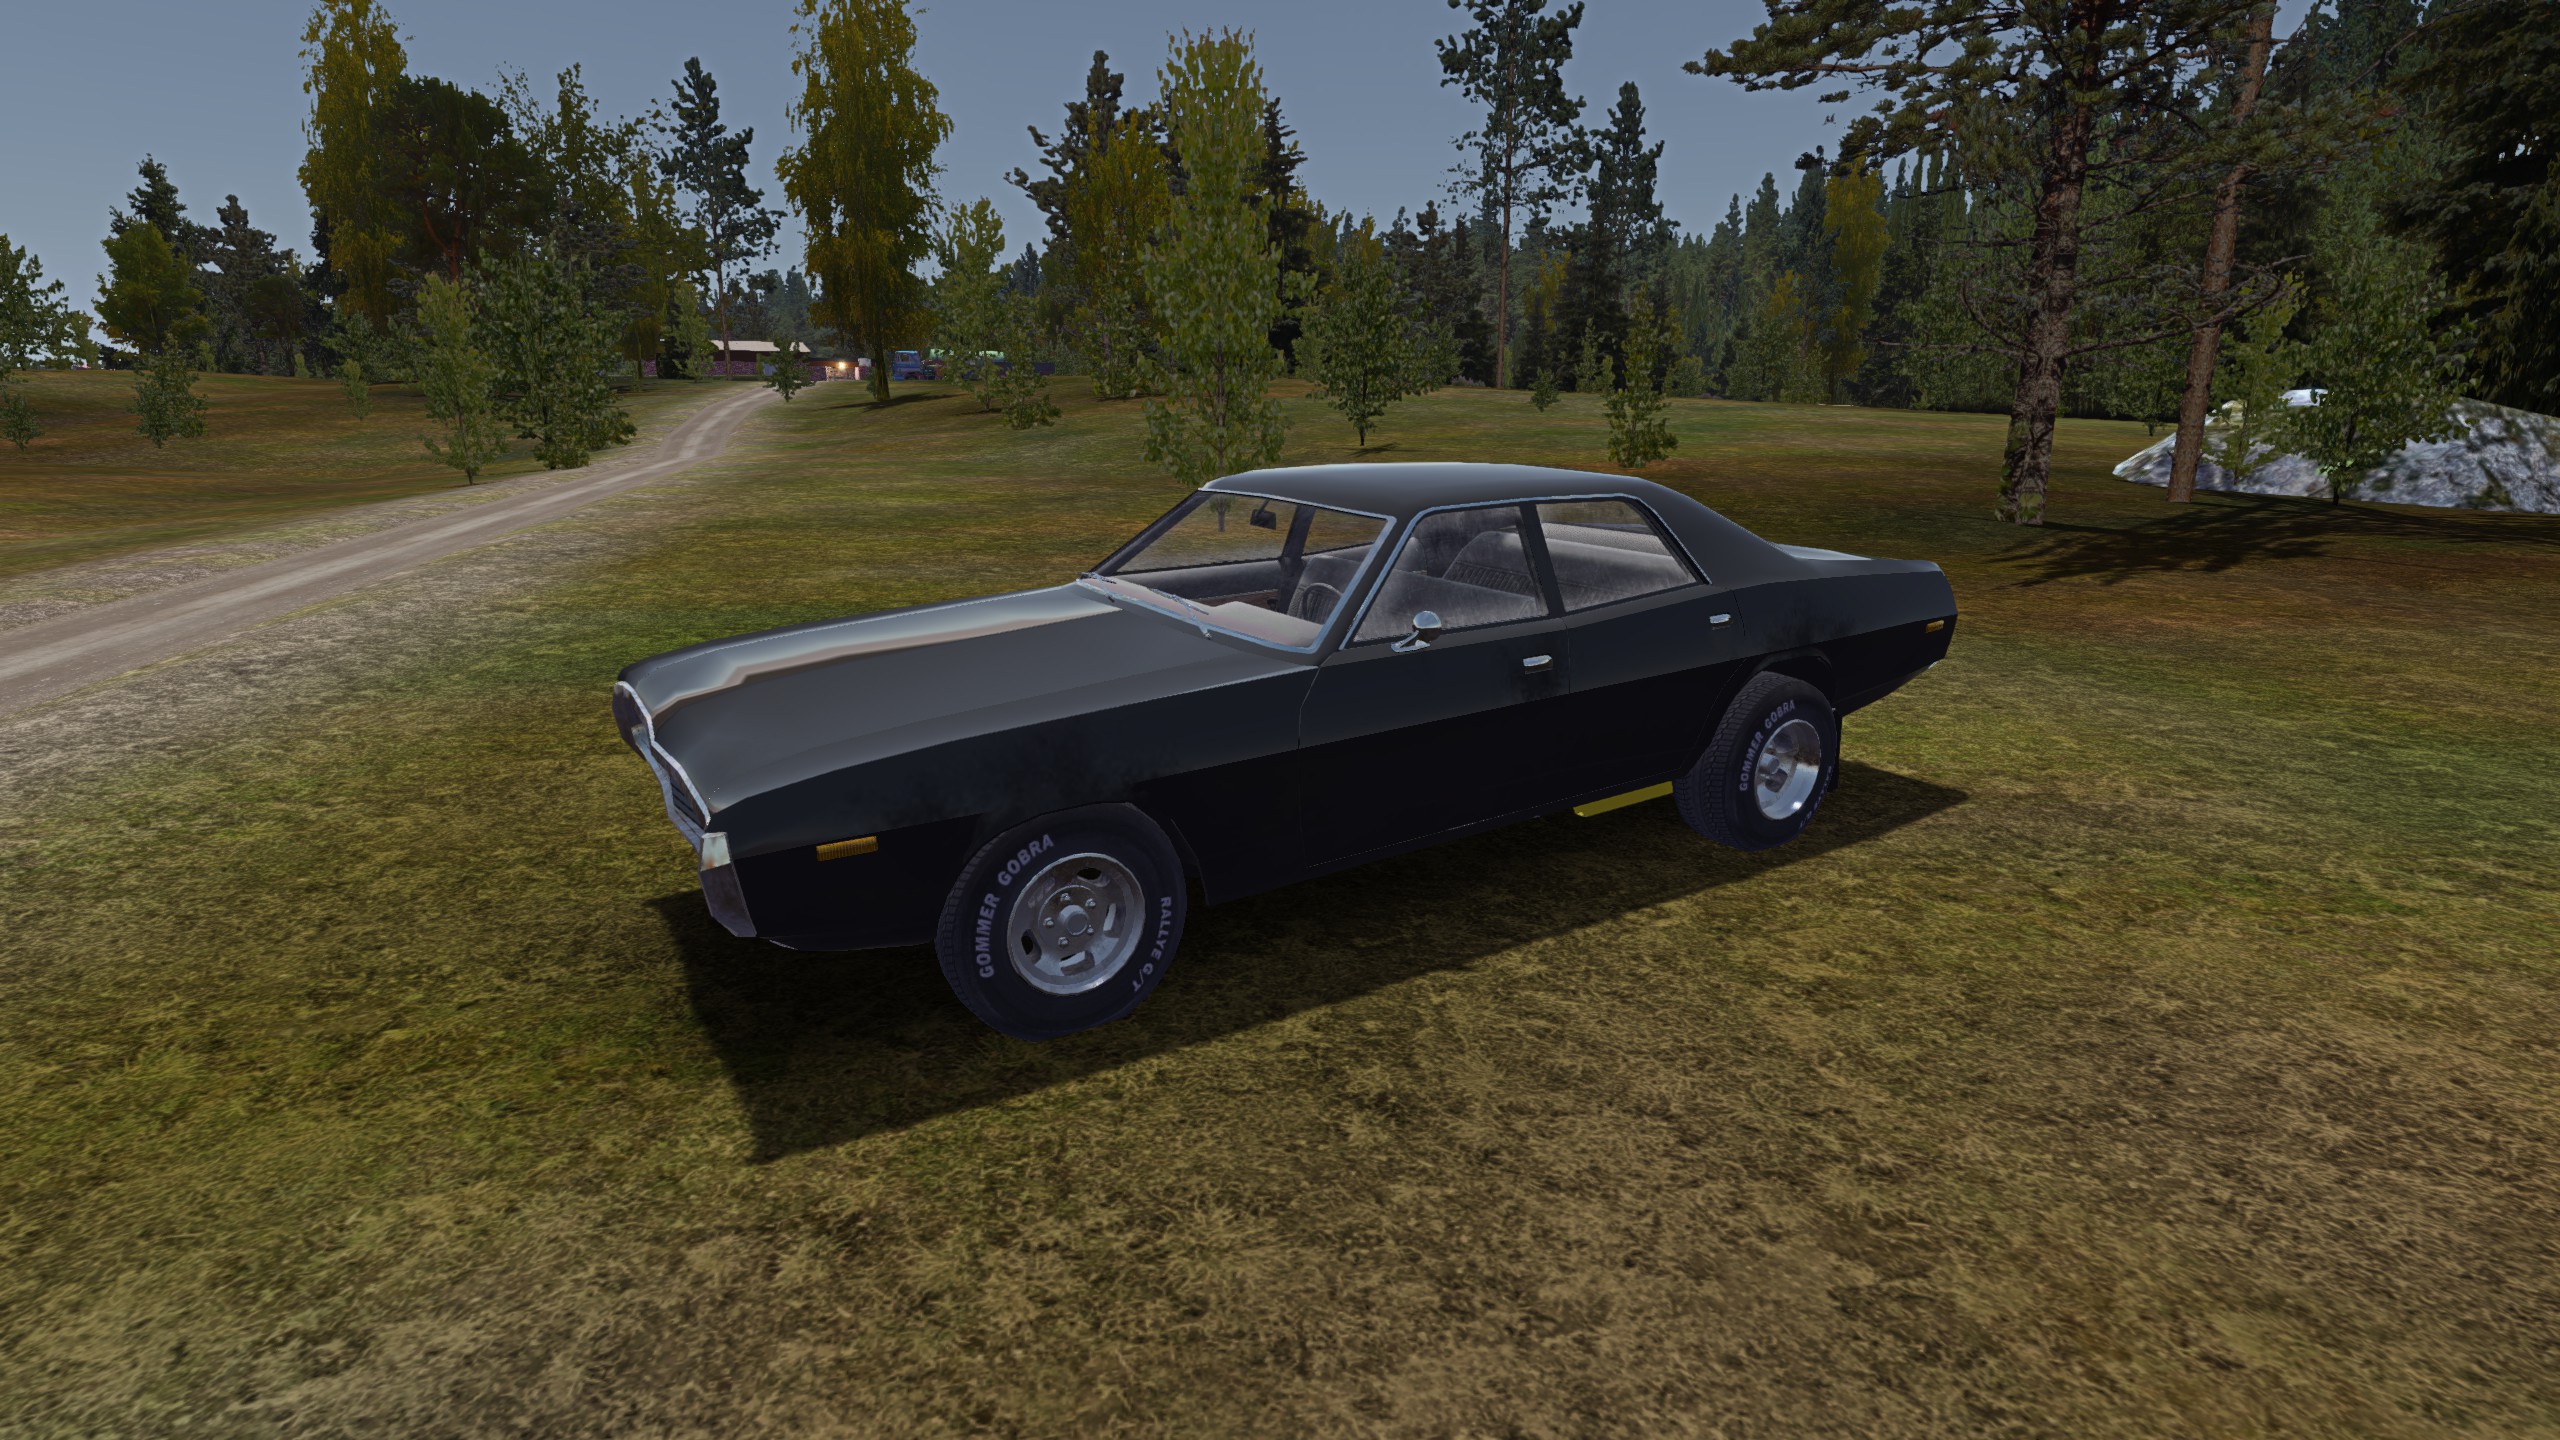 My Summer Car - Second Ferndale - New standalone car - Games Manuals